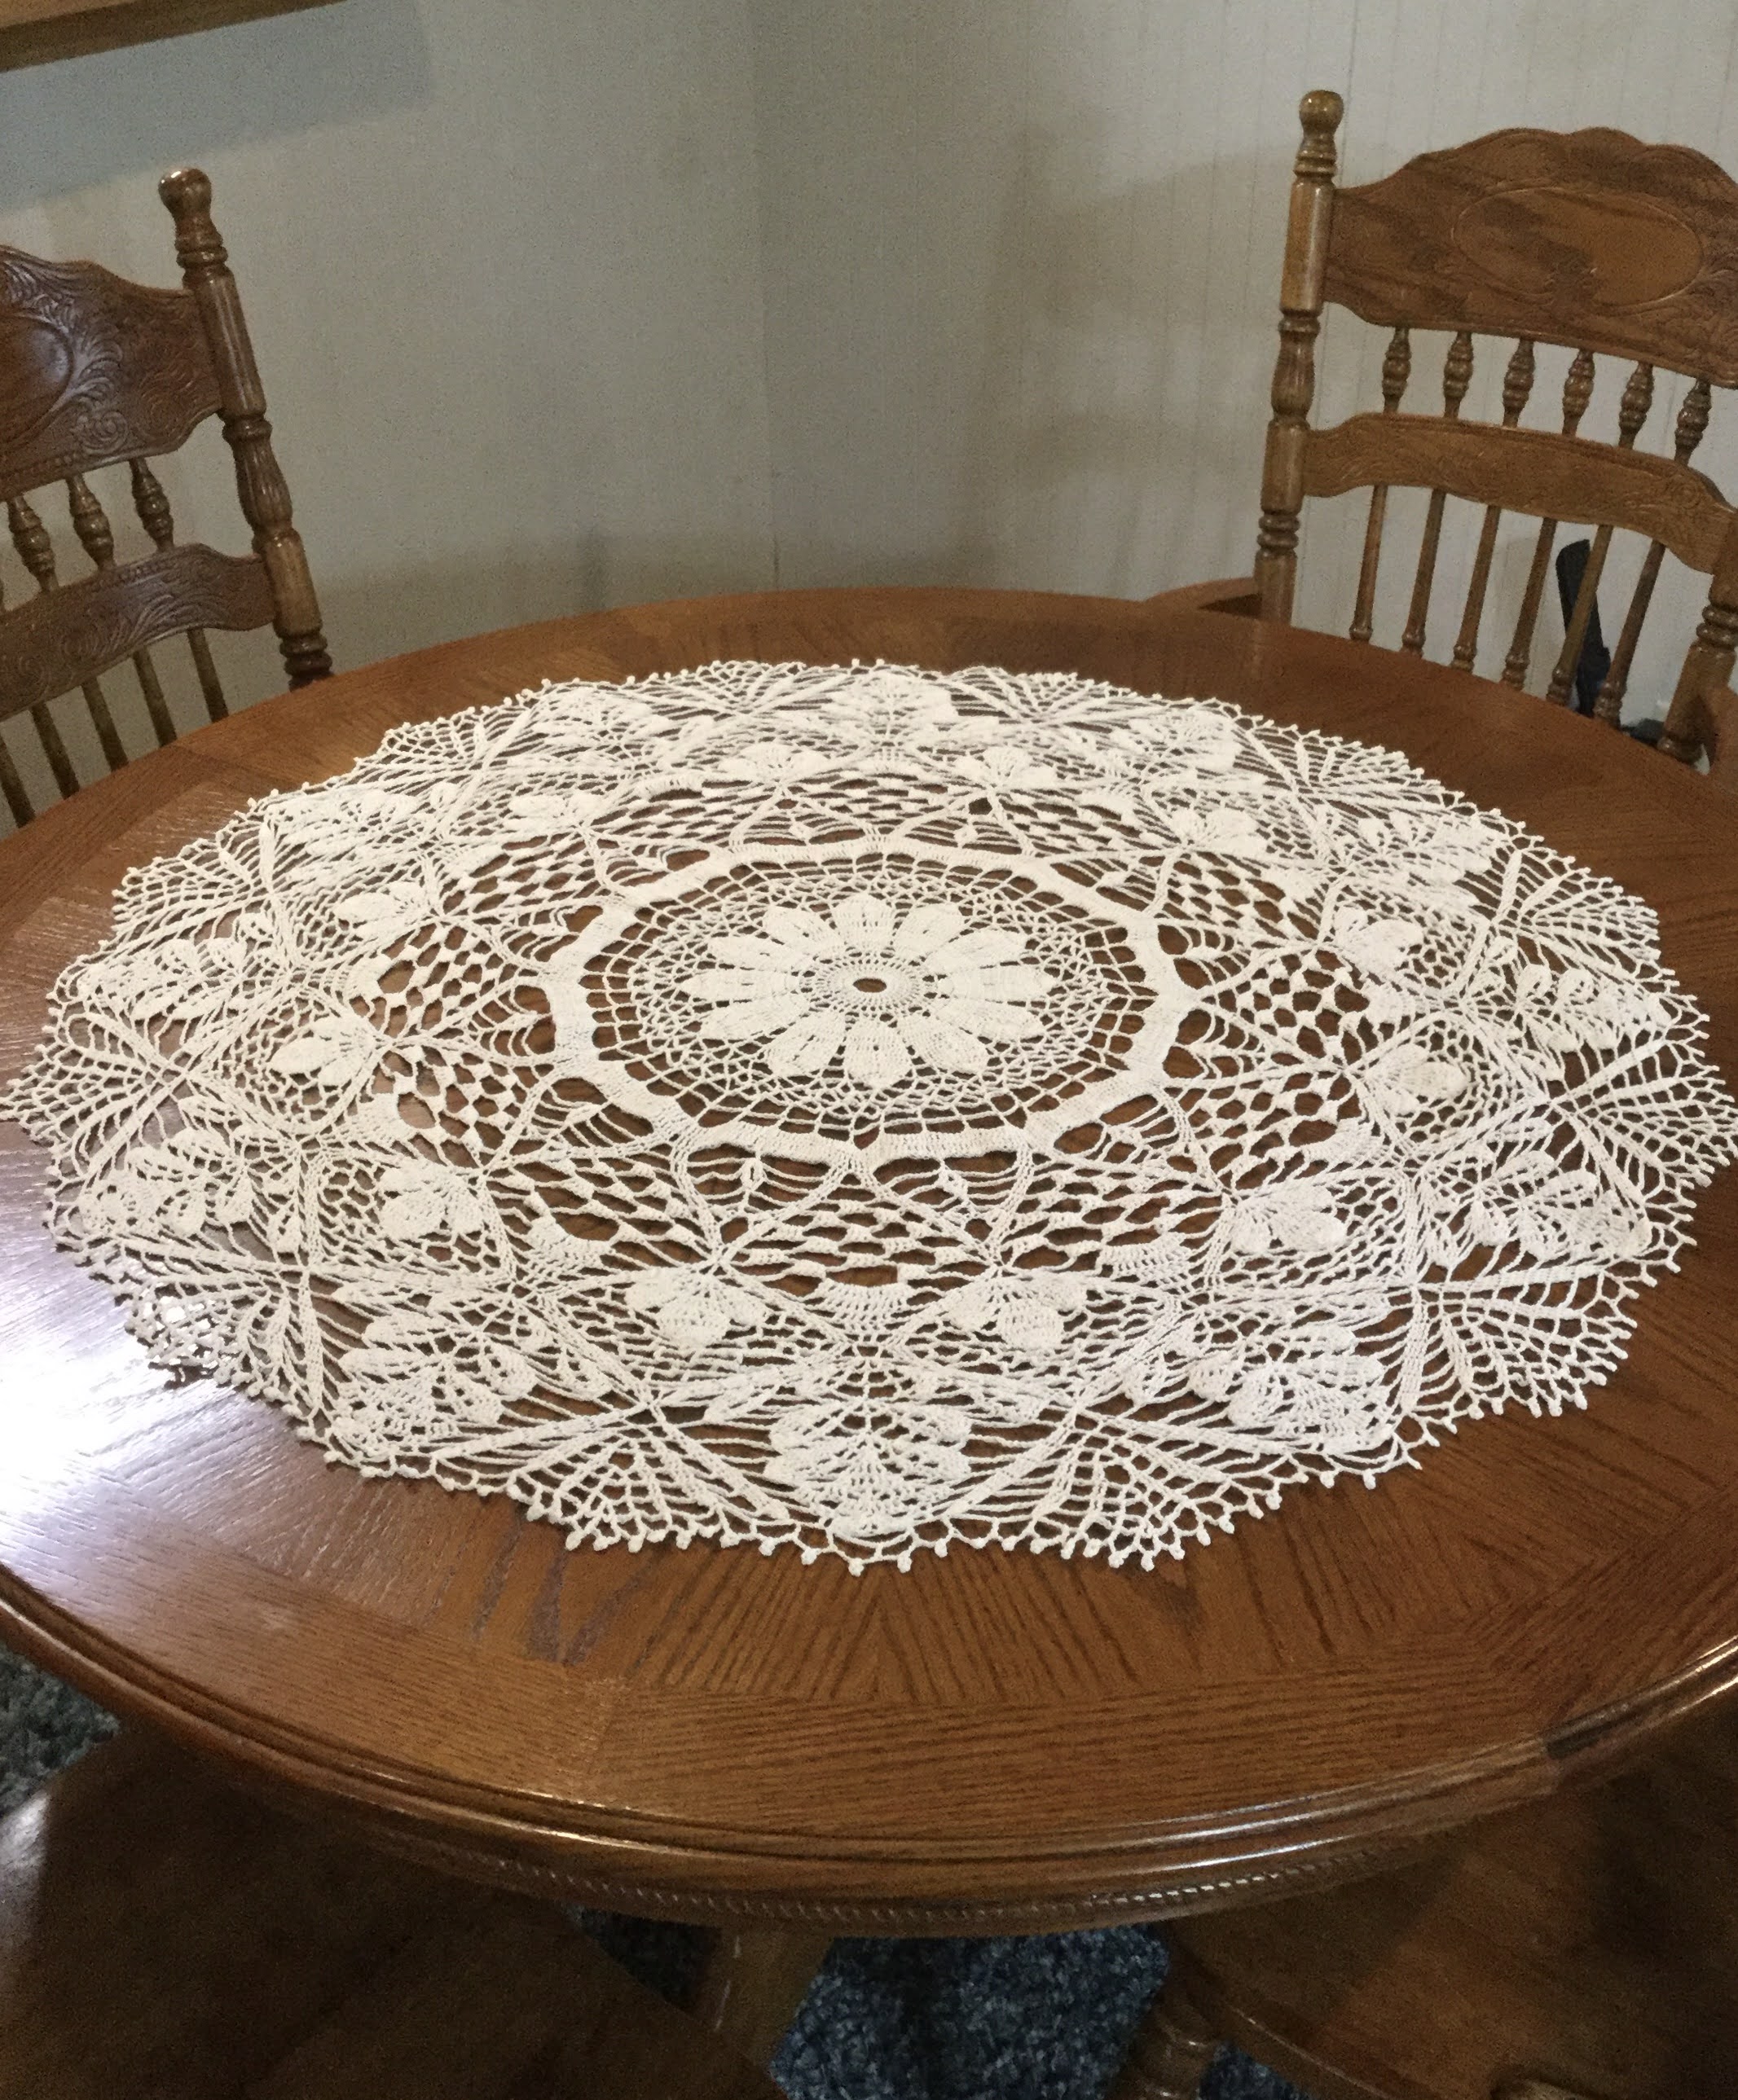 A crocheted lace doily on a table